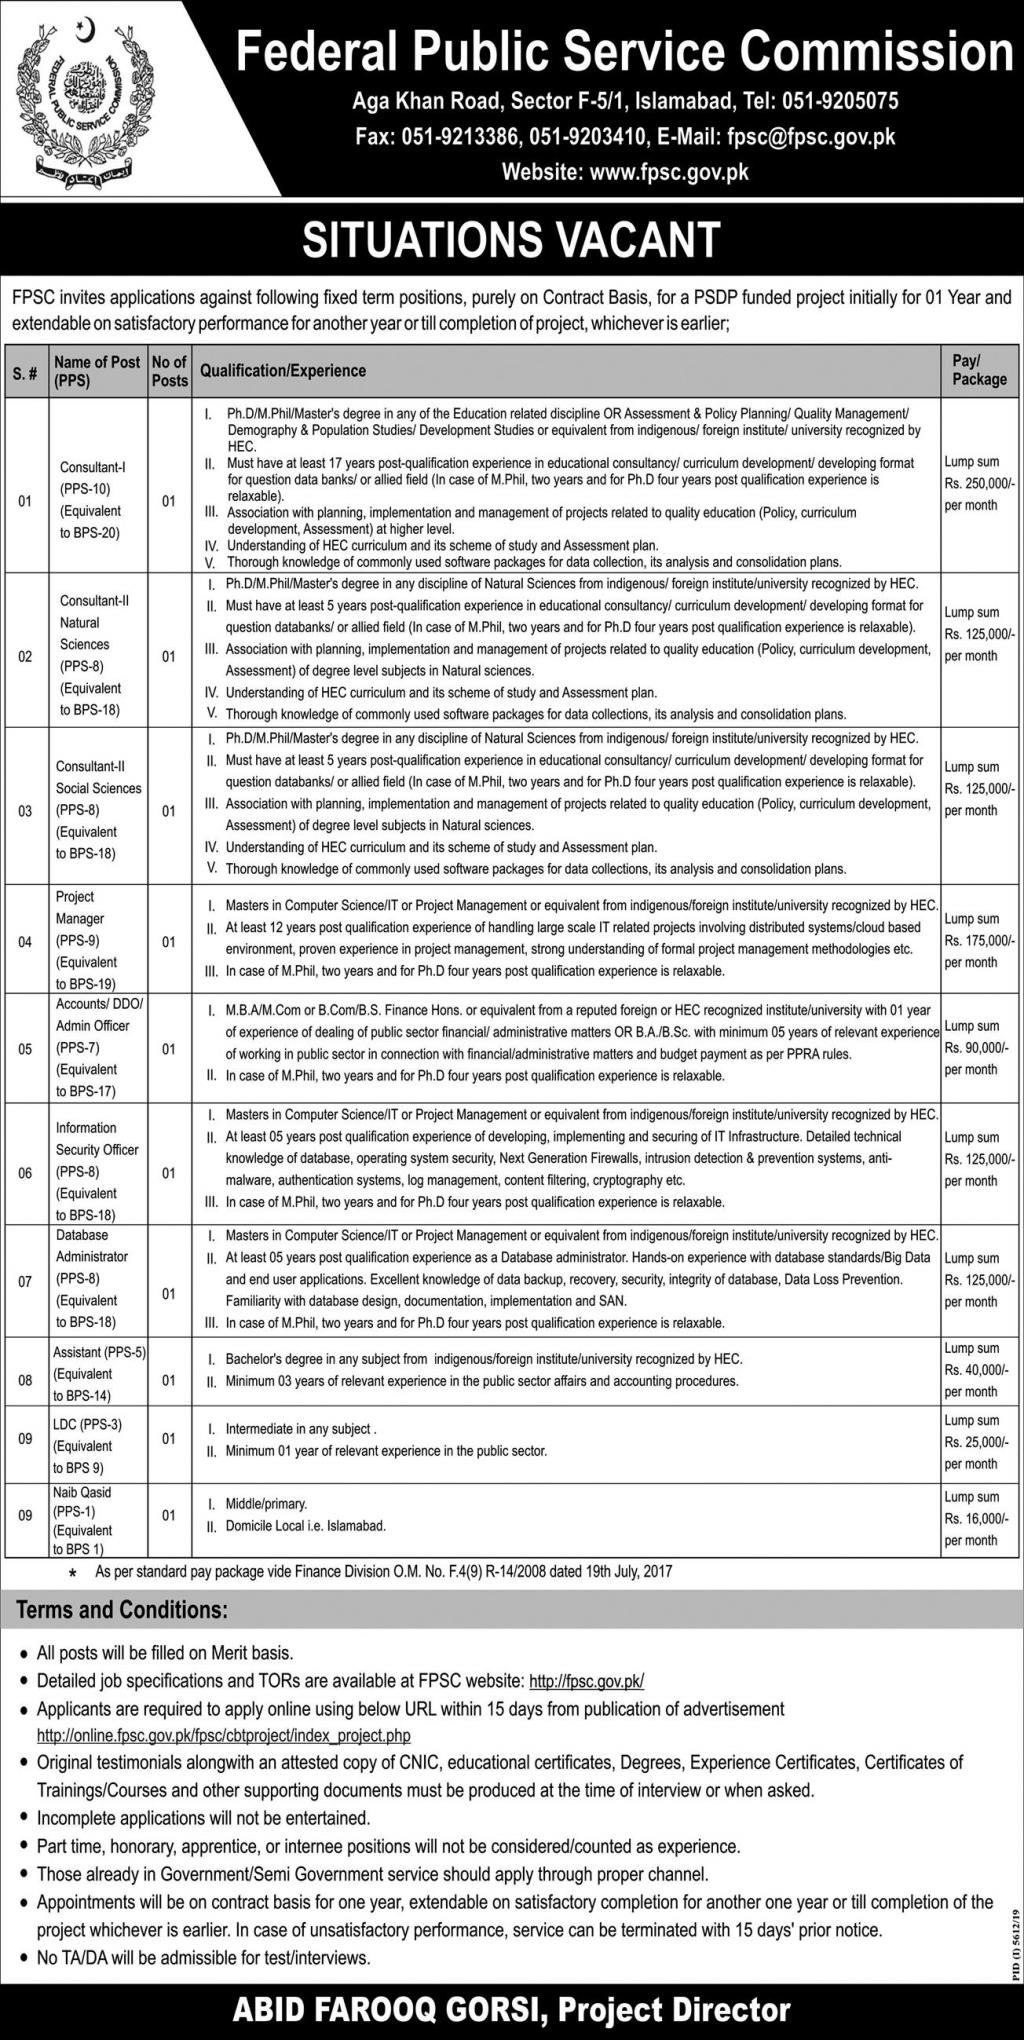 Multiples Position | Federal Public Service Commission | Jobs in Pakistan 2020